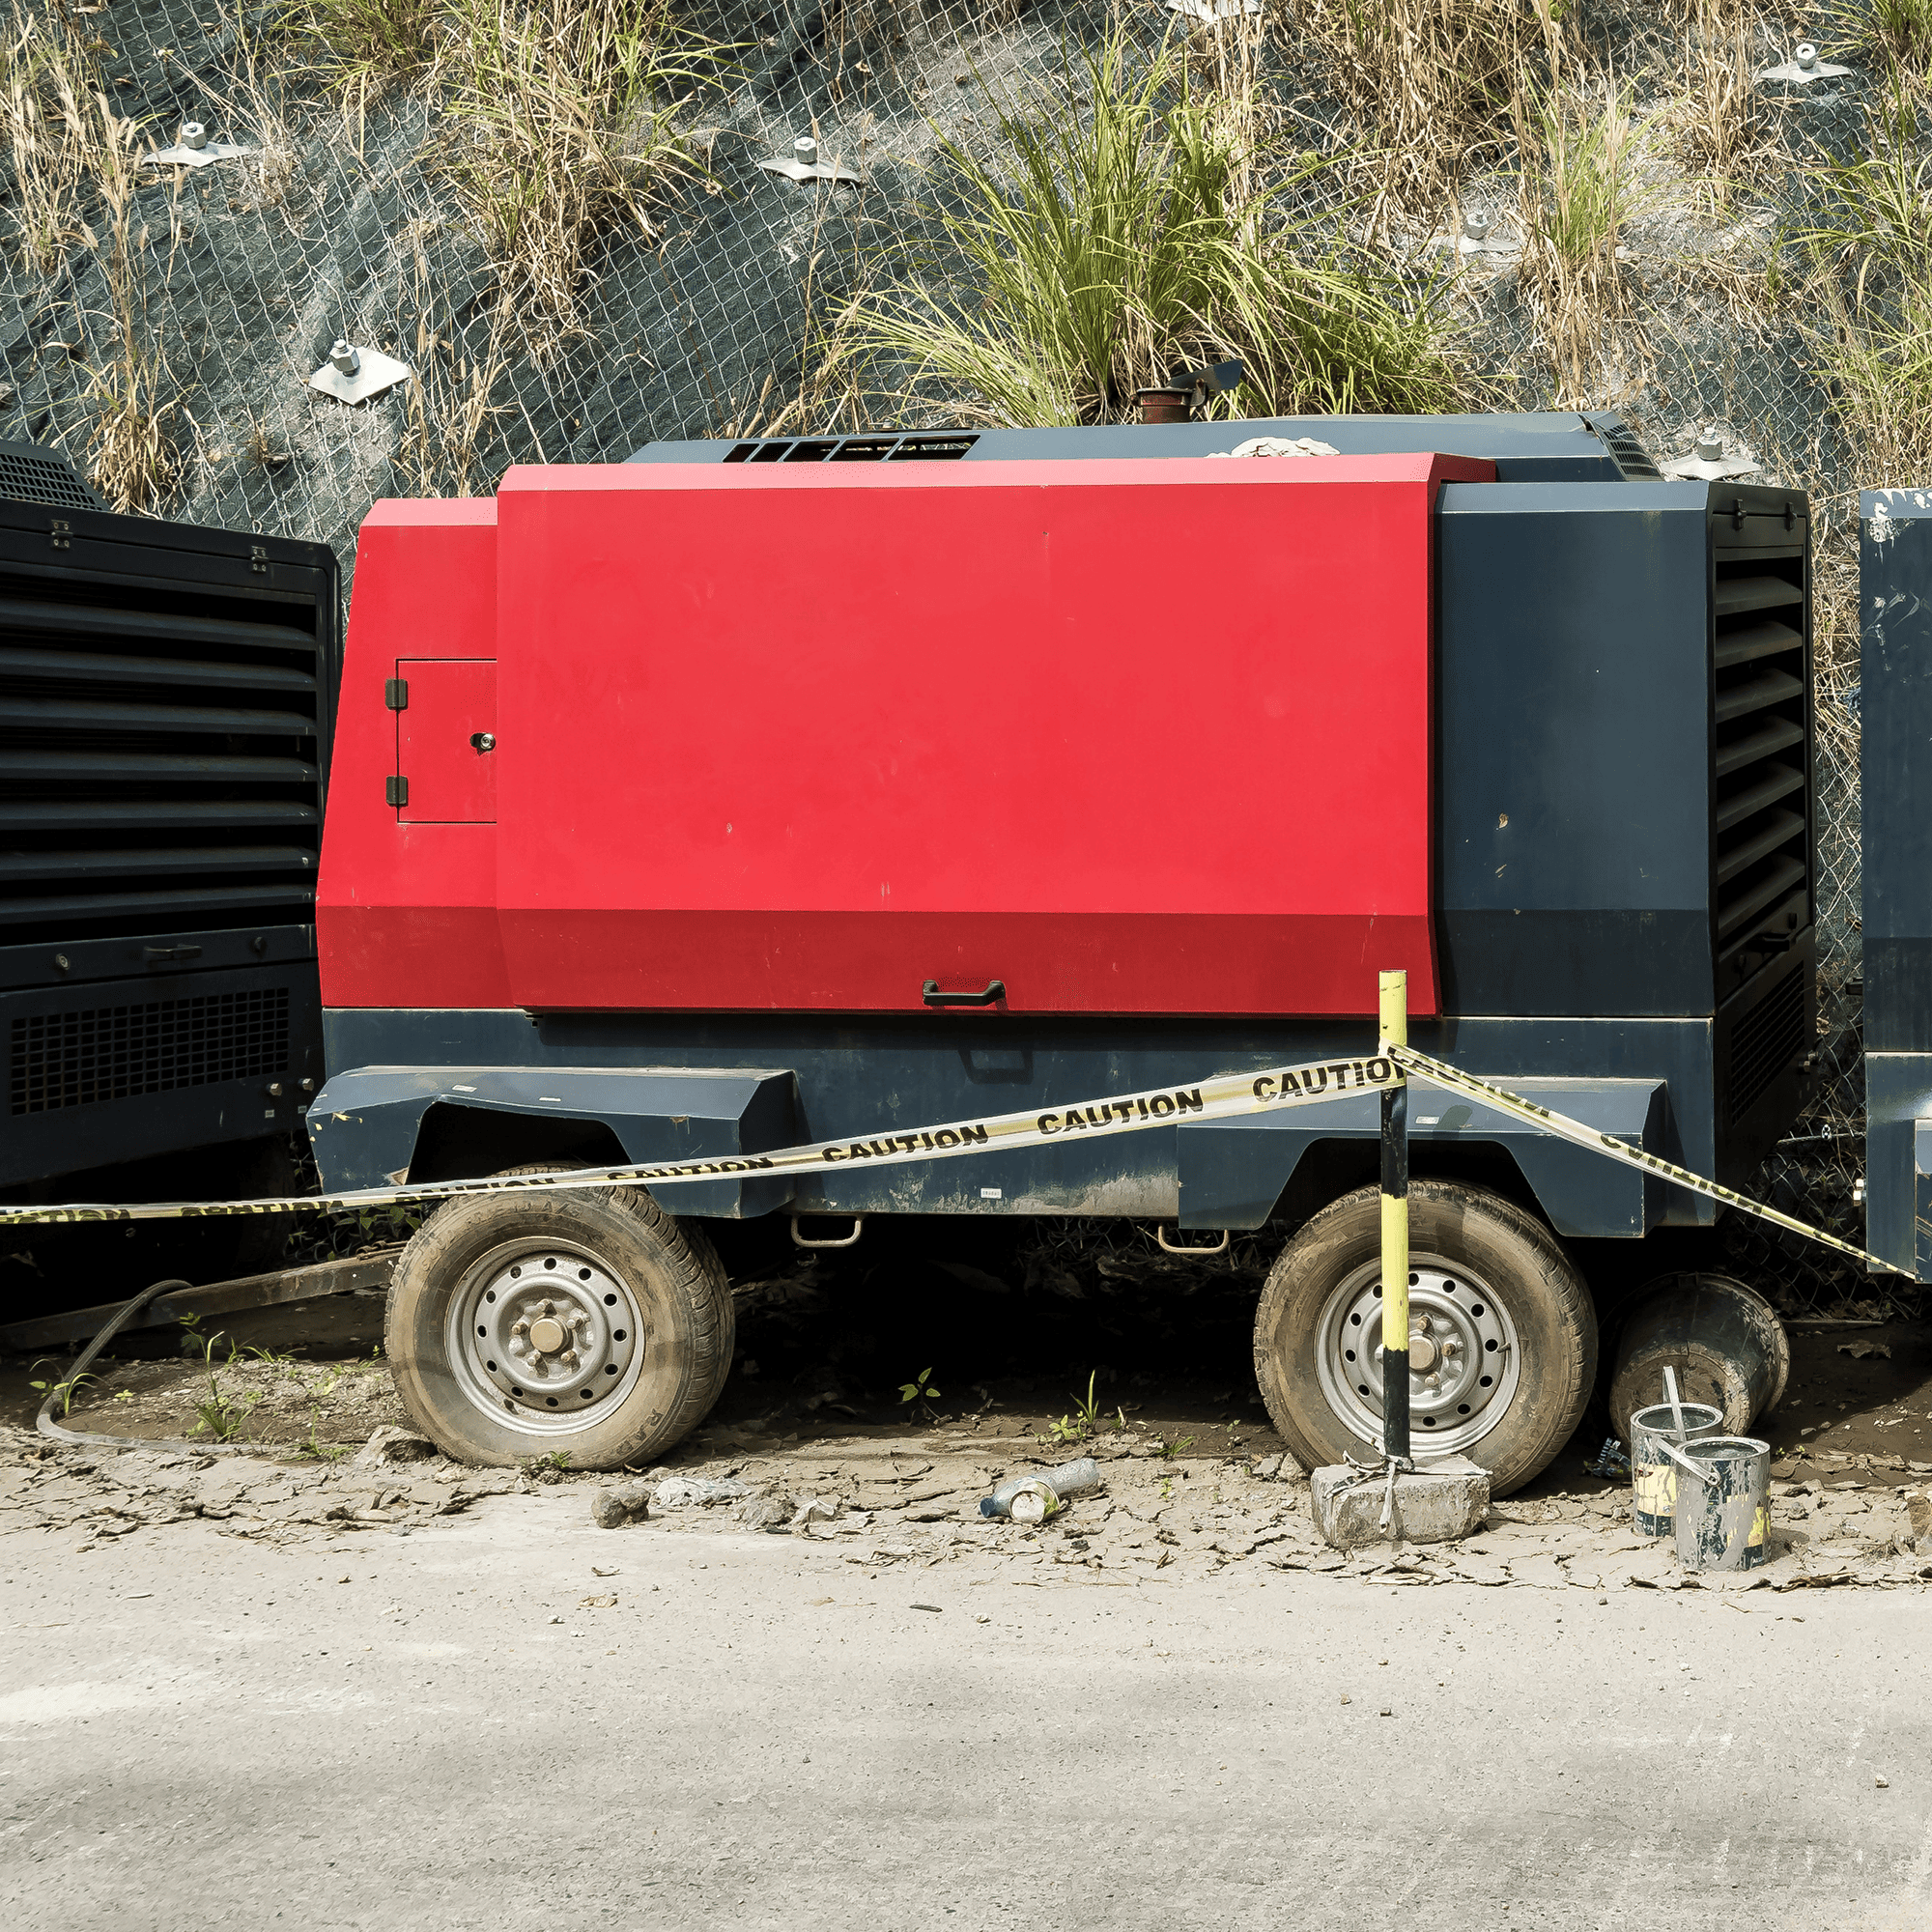 A red air compressor sitting in front of a chain fence on a concrete roadside